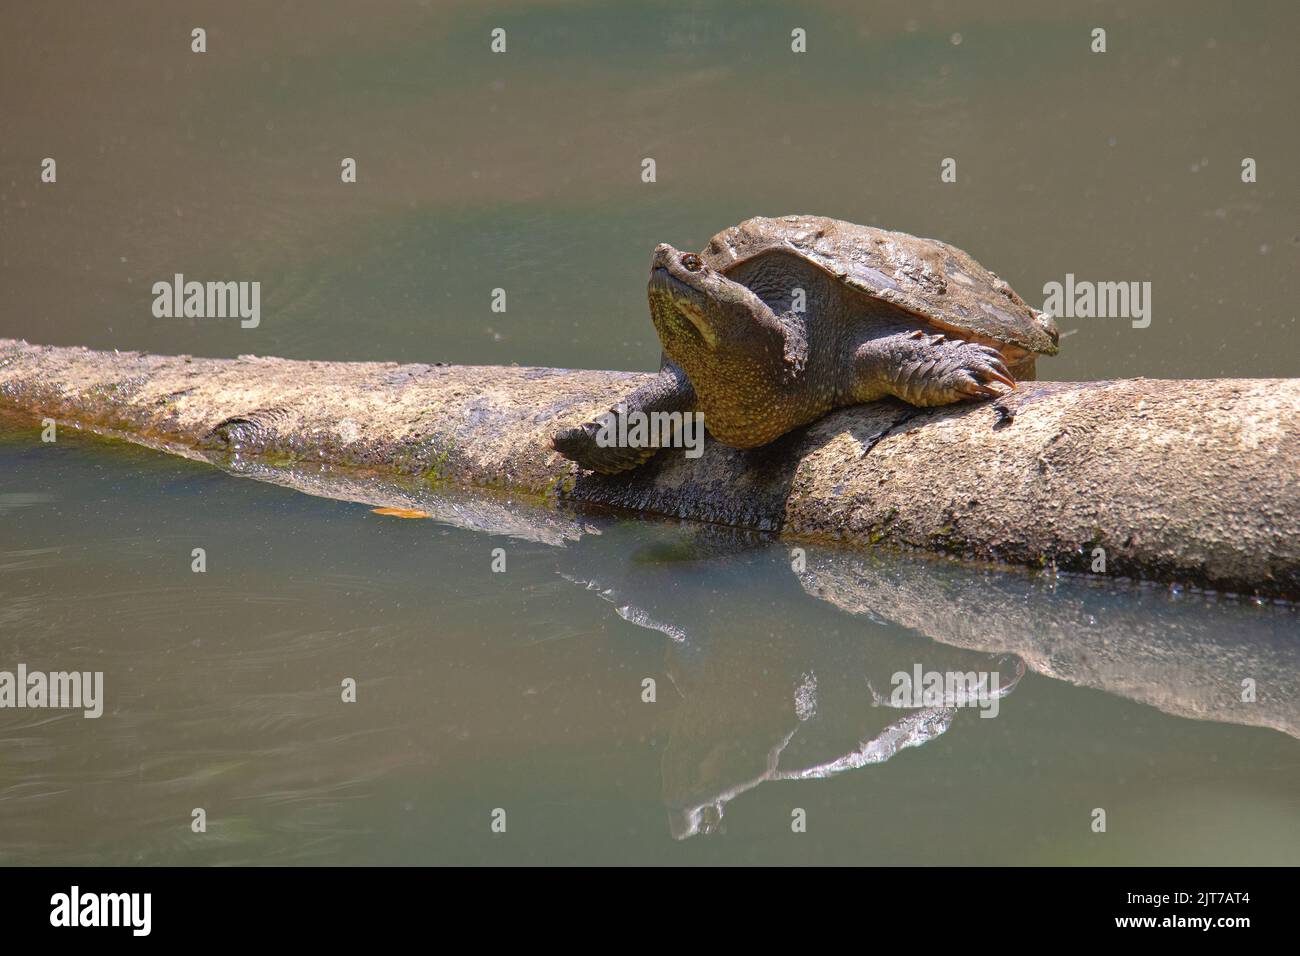 Snapping turtle sunning on a partially submerged log; Stock Photo